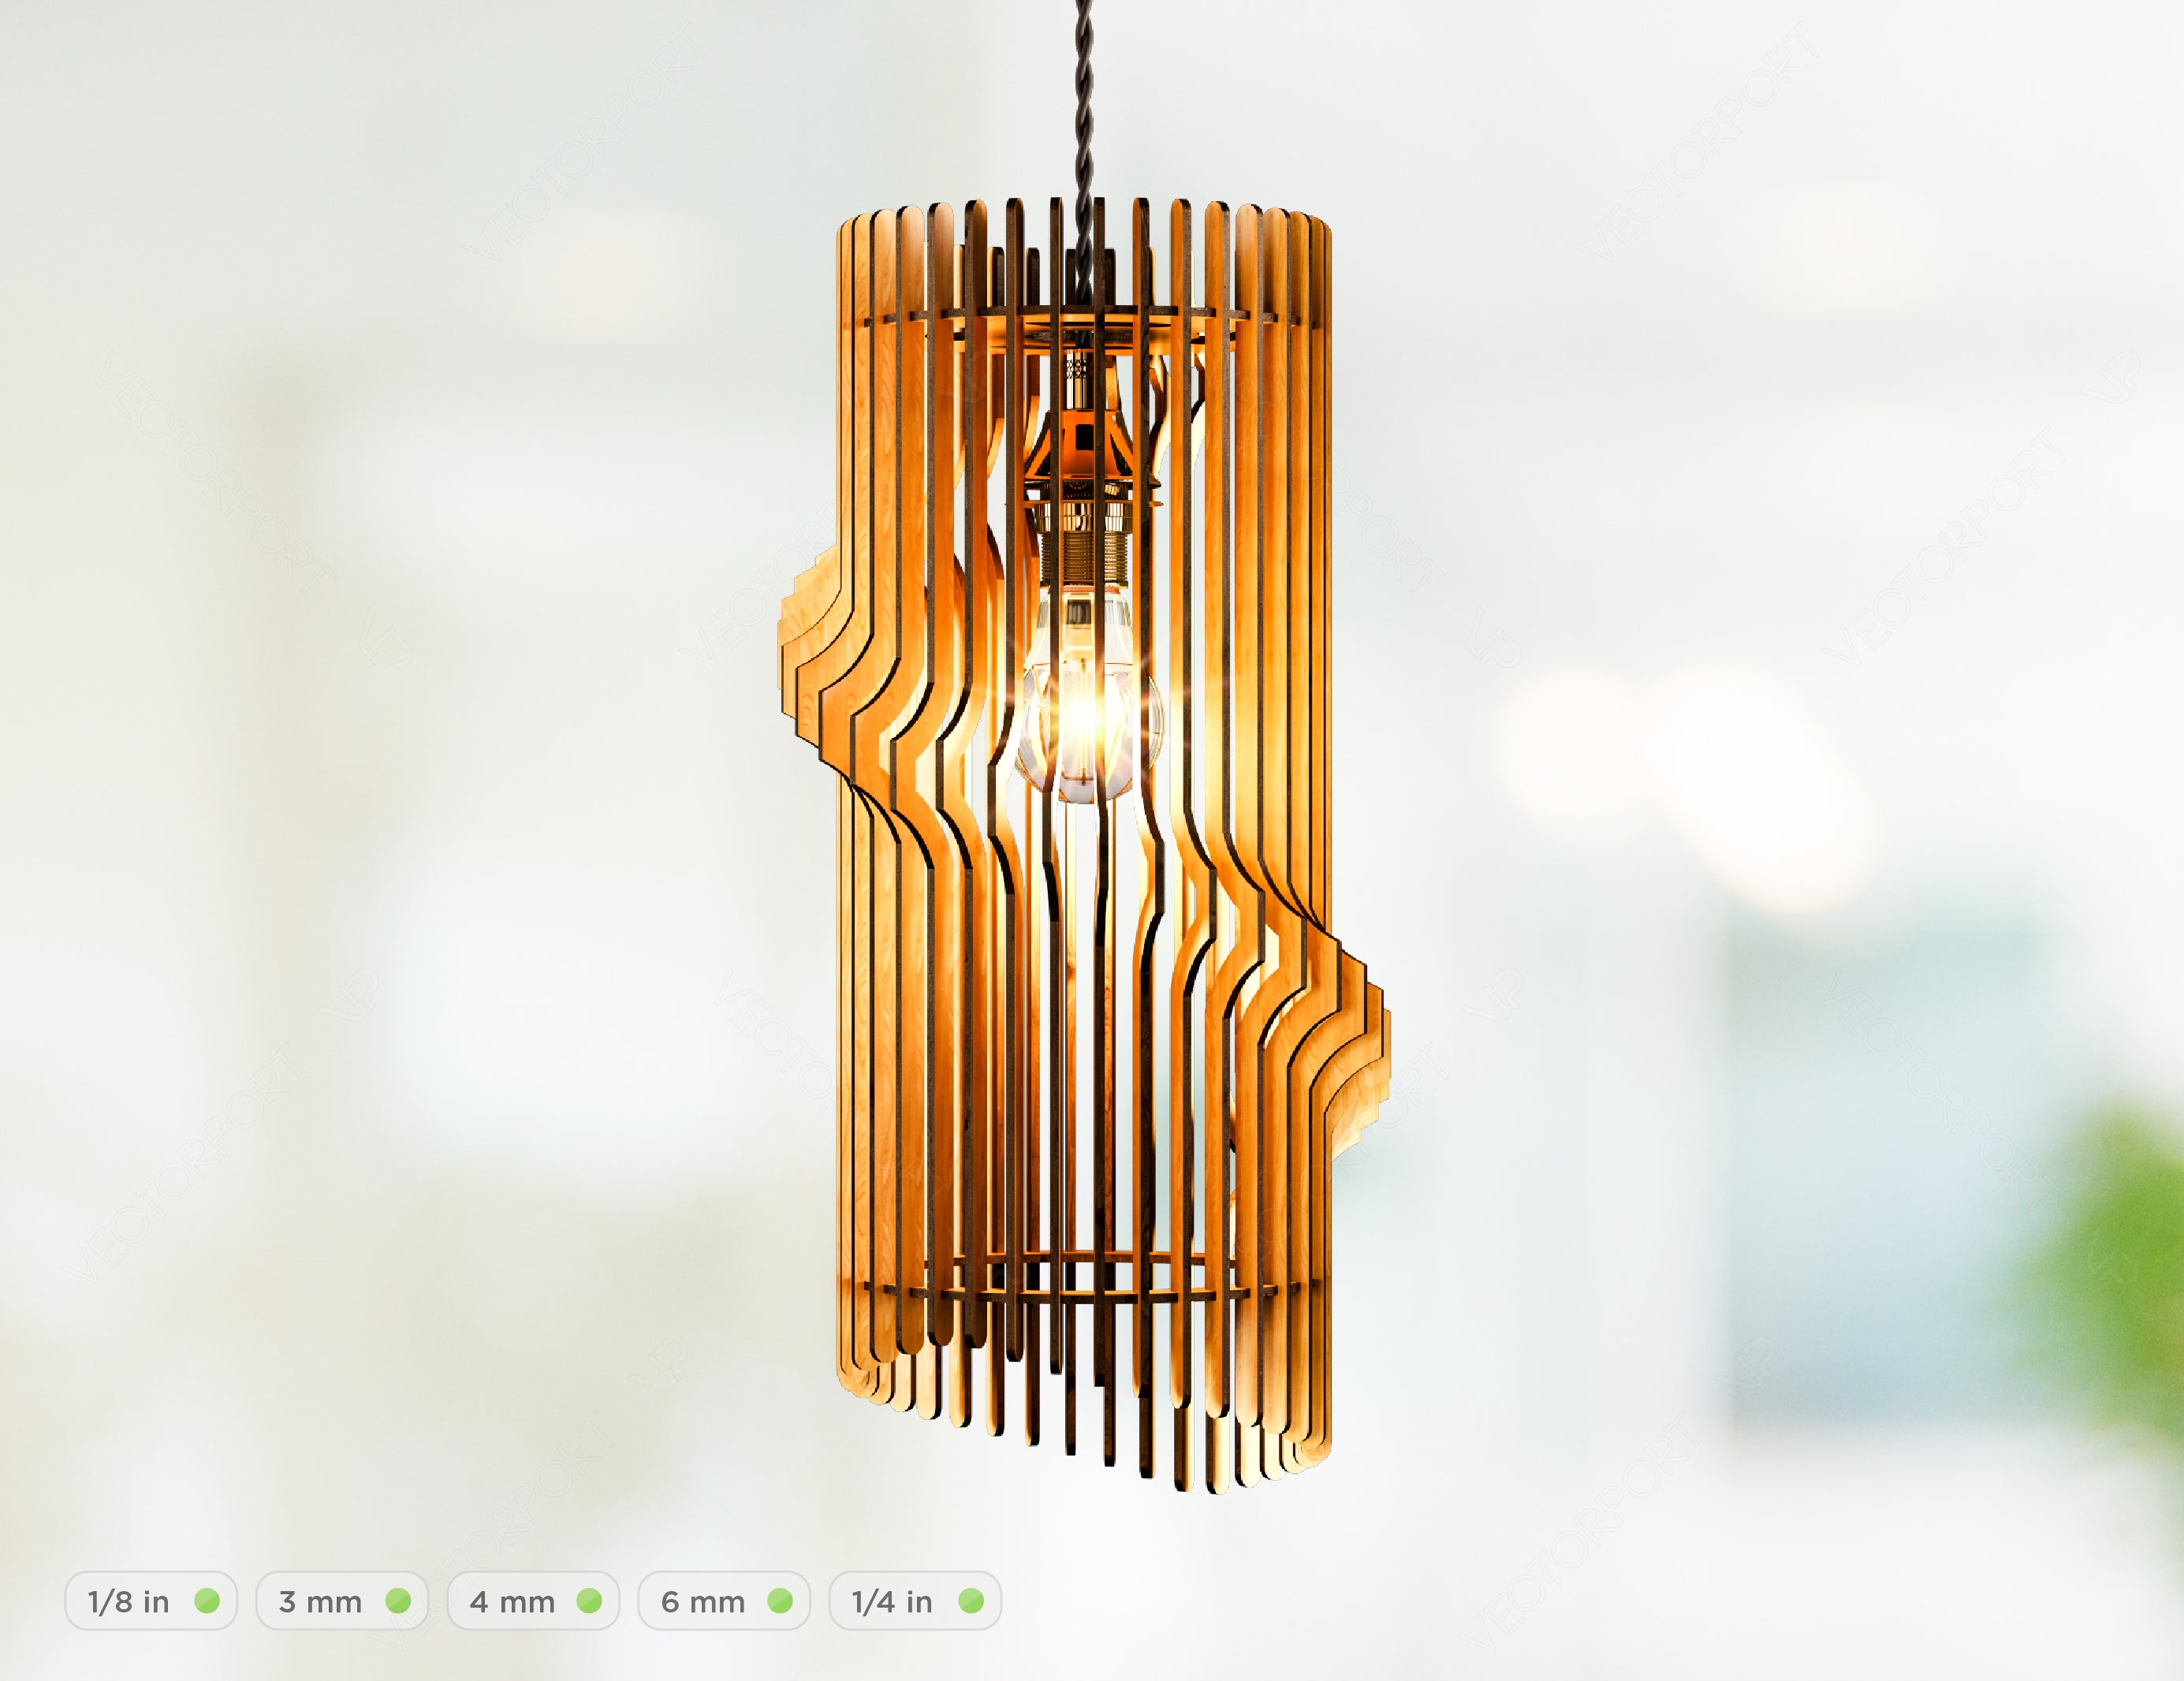 The Angles pendant lamp is perfect harmony of laser-cut wooden rectangles